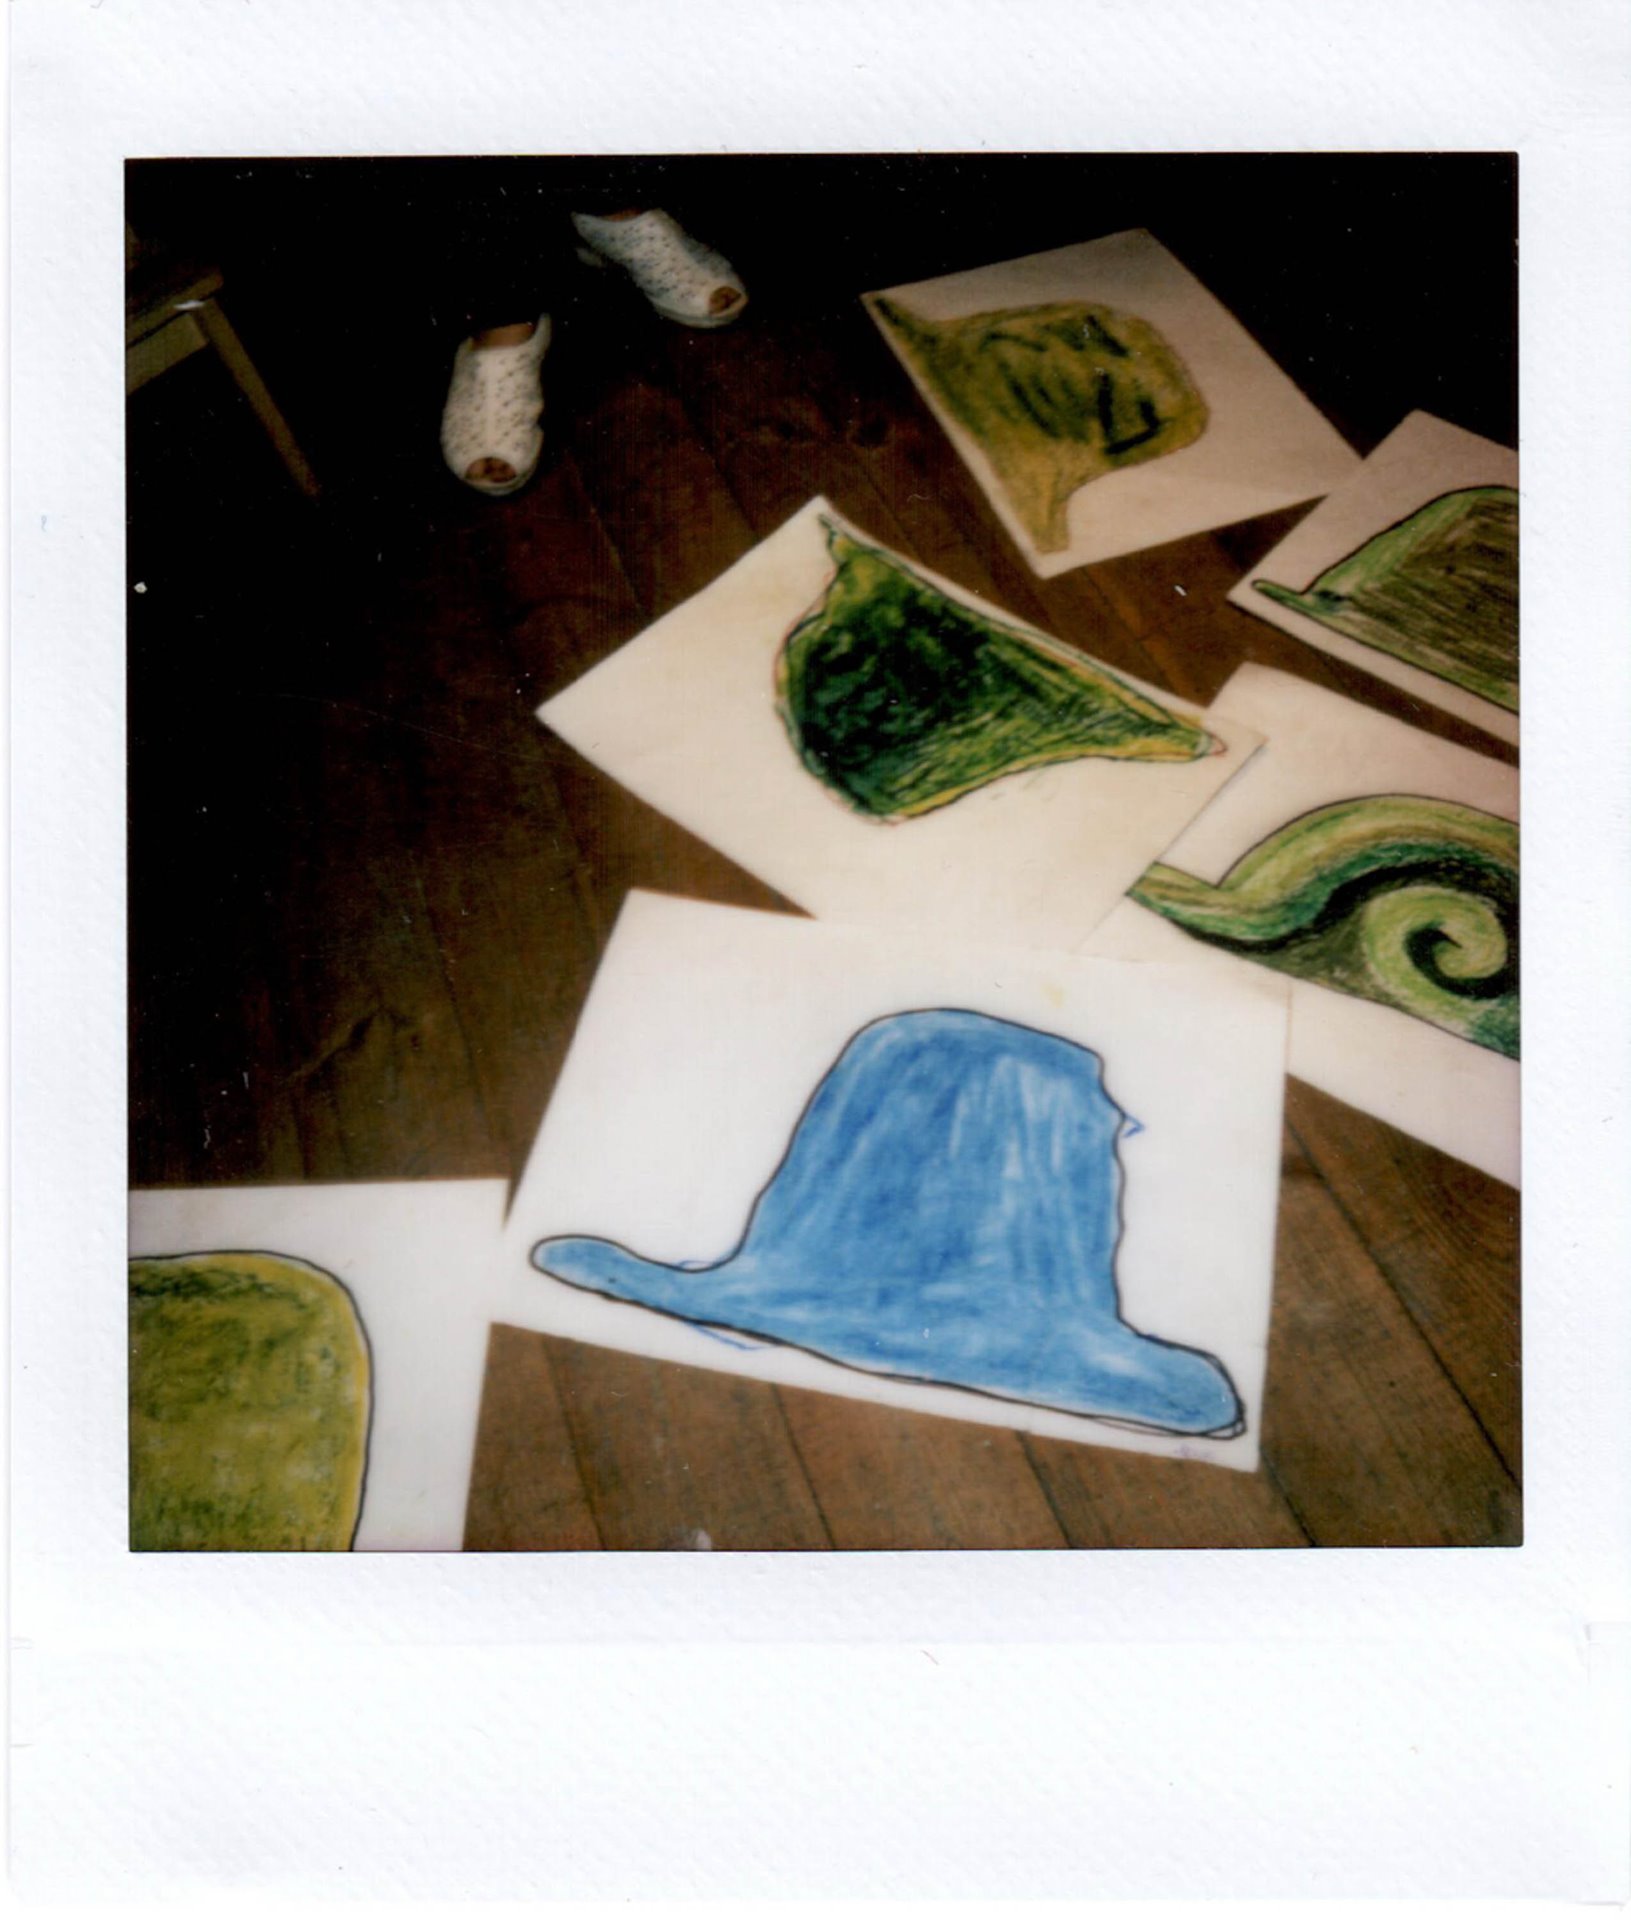 Drawings made for the Svetlana residents&rsquo; production of <em>The Little Prince</em>, in a photograph taken by Tatyana.